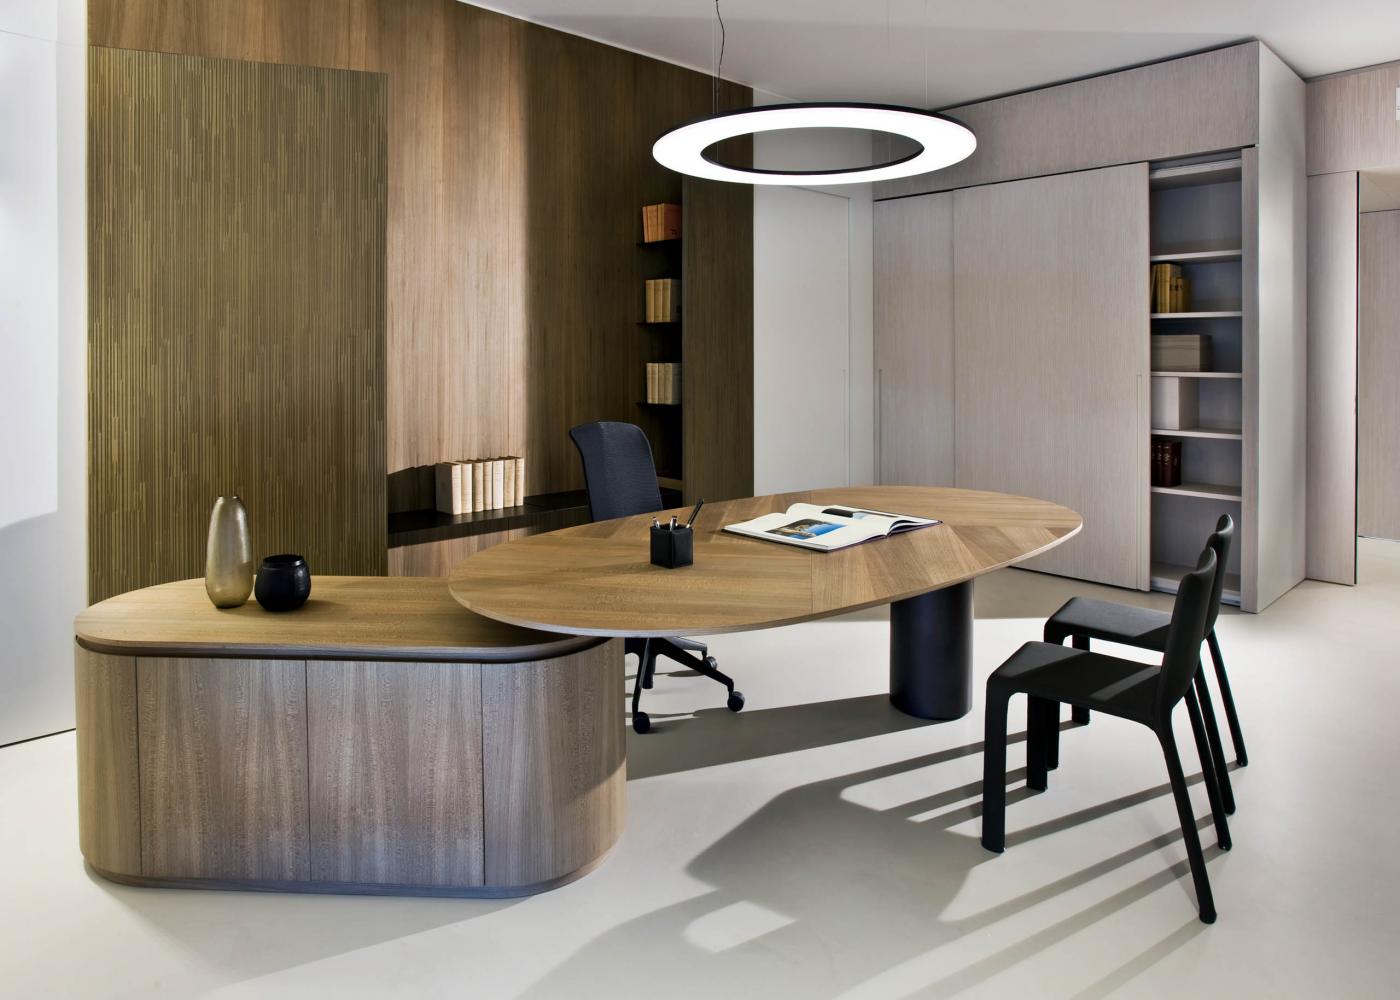 laurameroni luxury and elegant customized corporate modern design ceo office with integrated cabinets and panels in elm wood